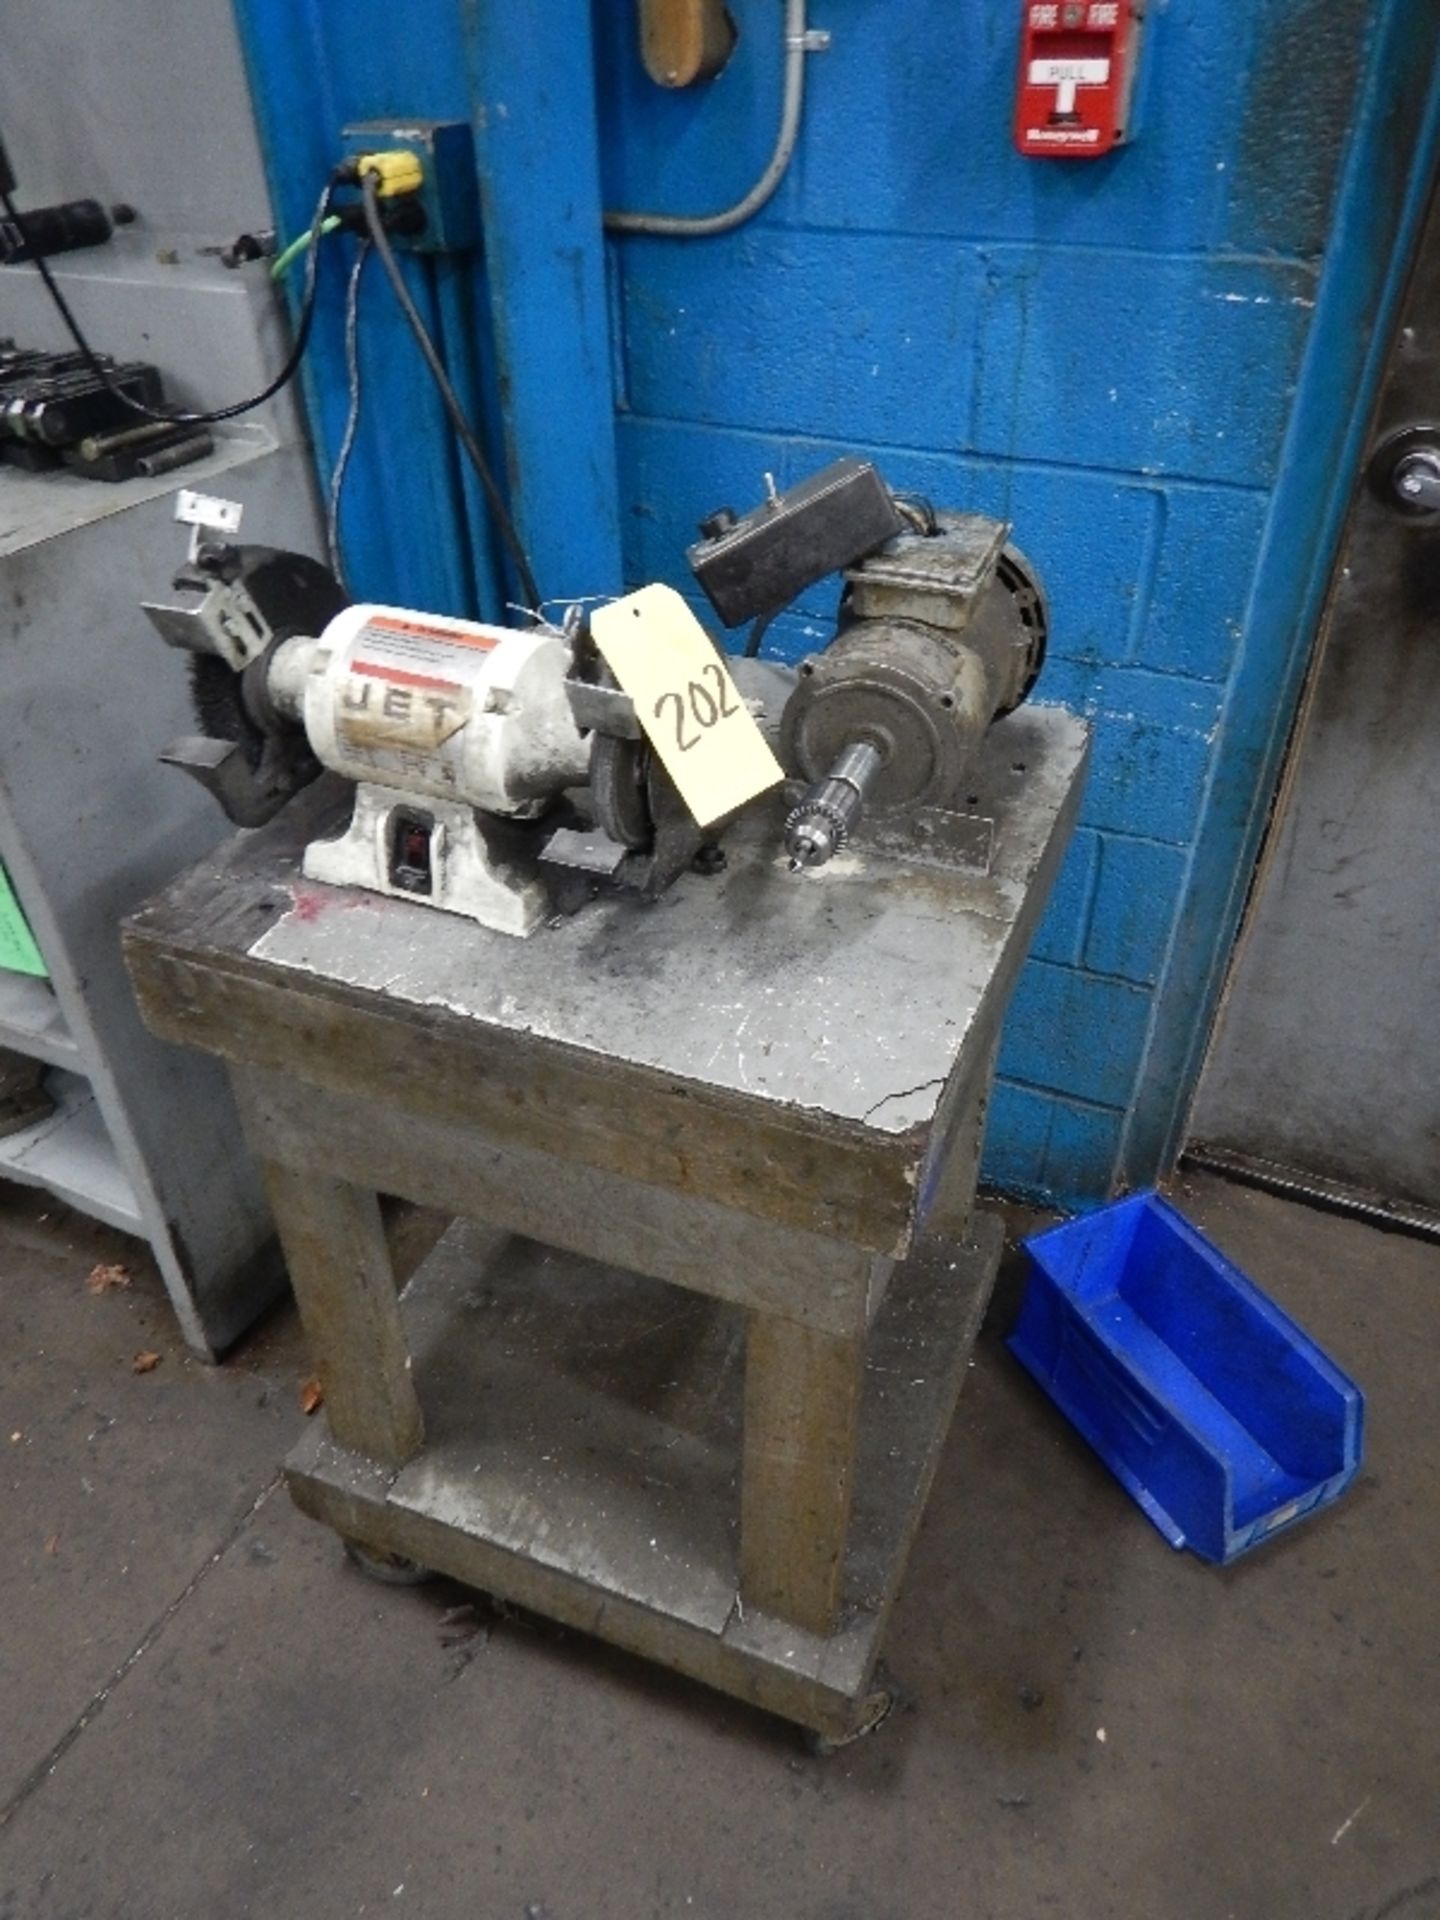 Jet Grinder, Drill Motor and cart & contents